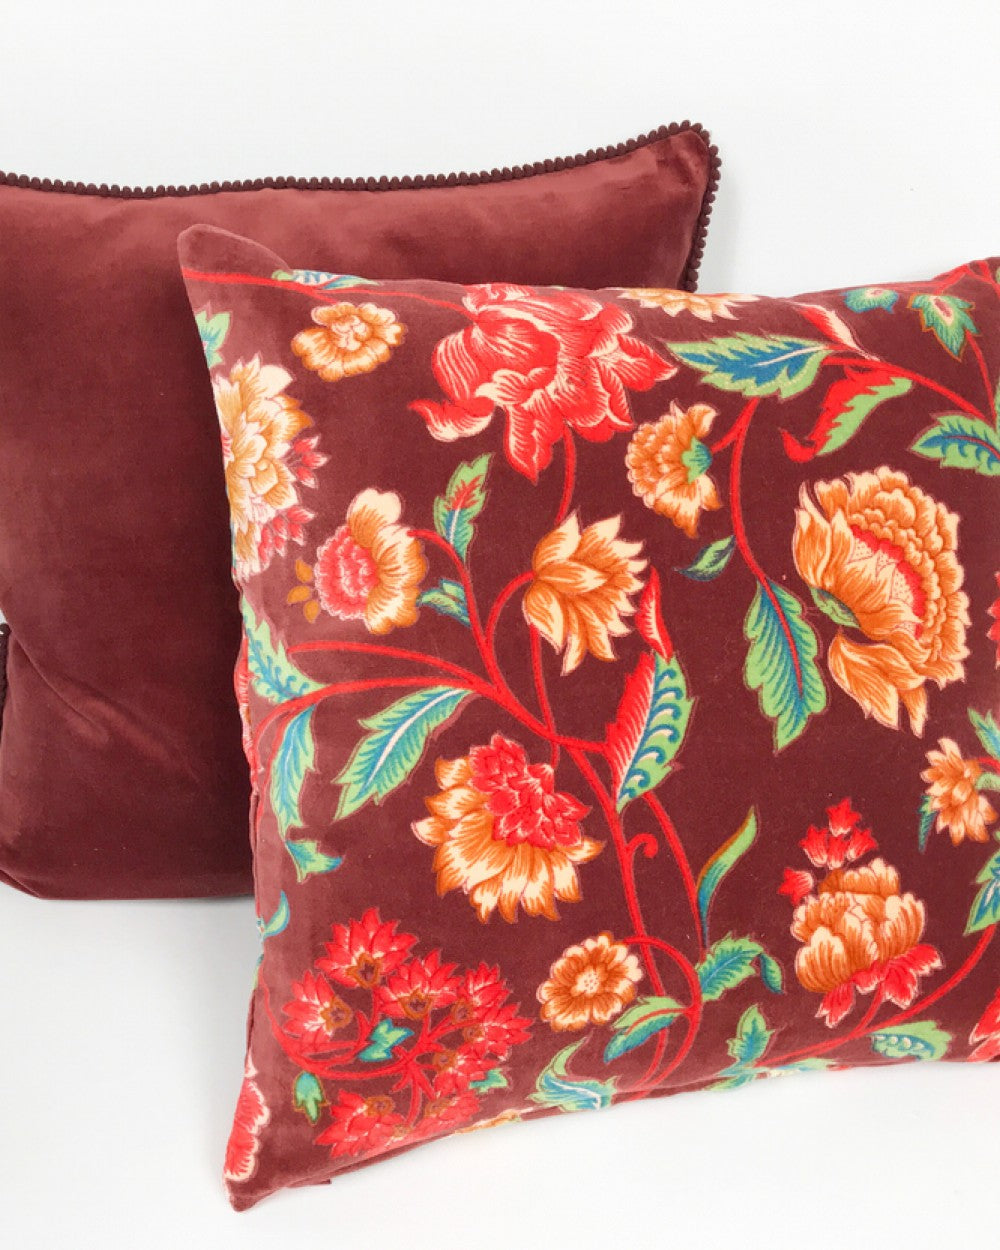 Red Lily velvet cushion with bright botanicals on a red rust background